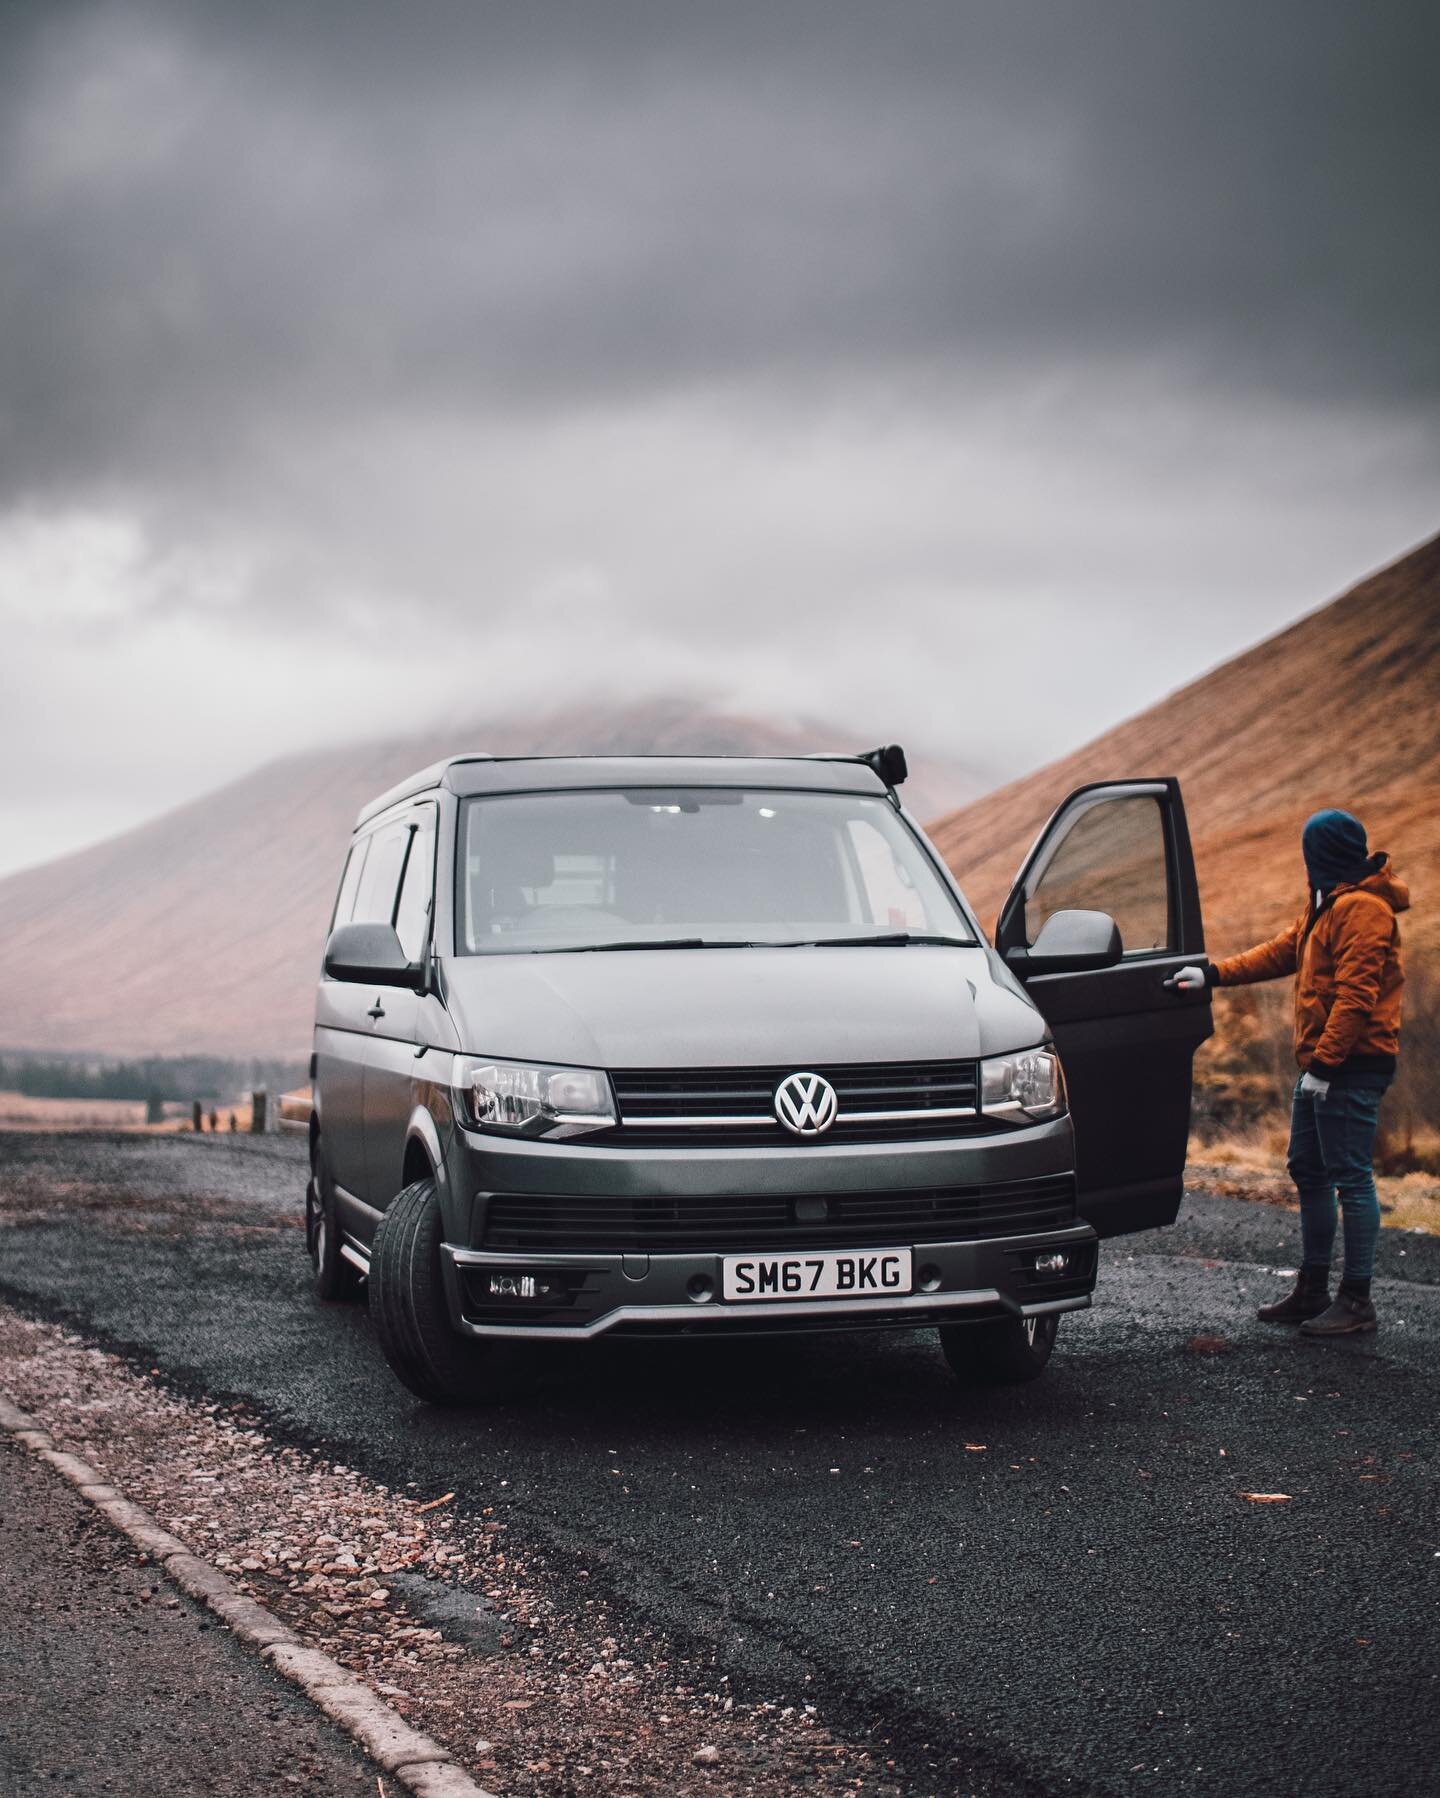 Disconnect and hit the road. We are now accepting bookings for 2021 with a shorter 3 night minimum until the end of March.

#vwcamper #campervan #travelphotography #travel #travelling #scotland #scotlandtravel #travelscotland #nc500 #scottishhighland